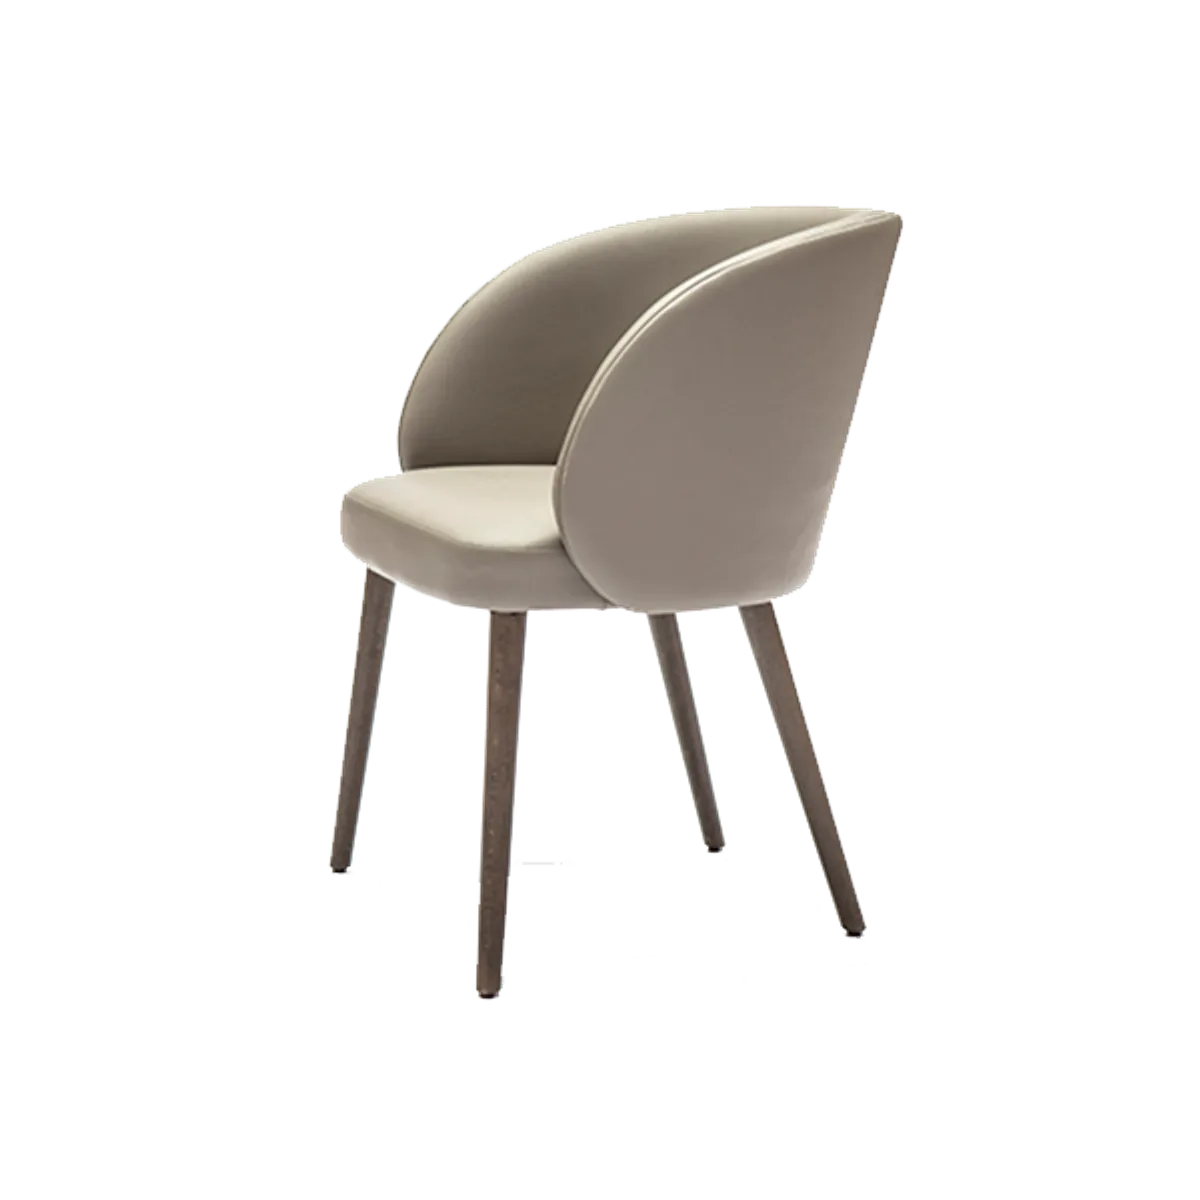 Web Halcyon Tub Chair Inside Out Contracts